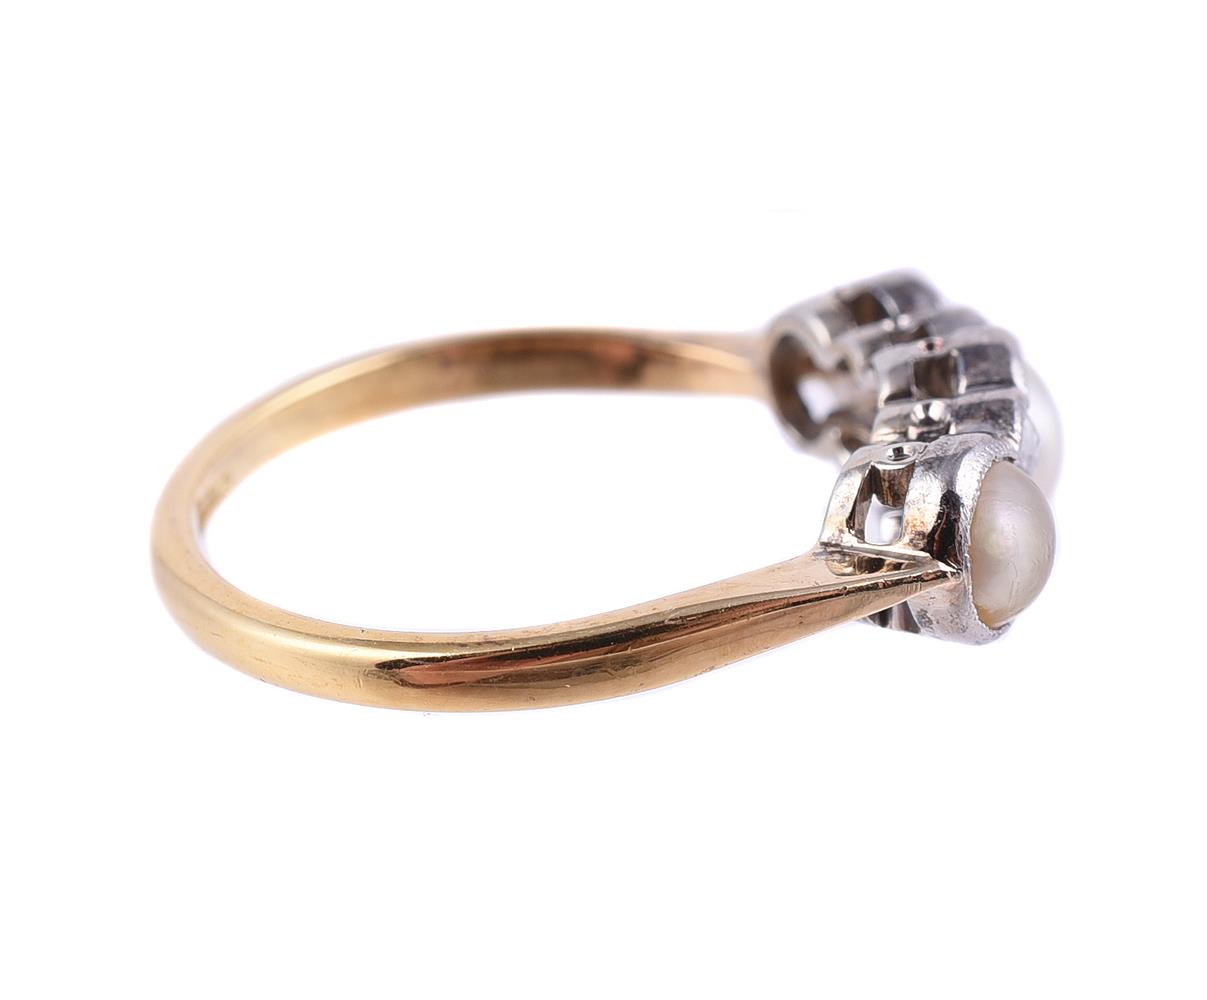 A HALF PEARL AND DIAMOND SEVEN STONE RING - Image 2 of 2